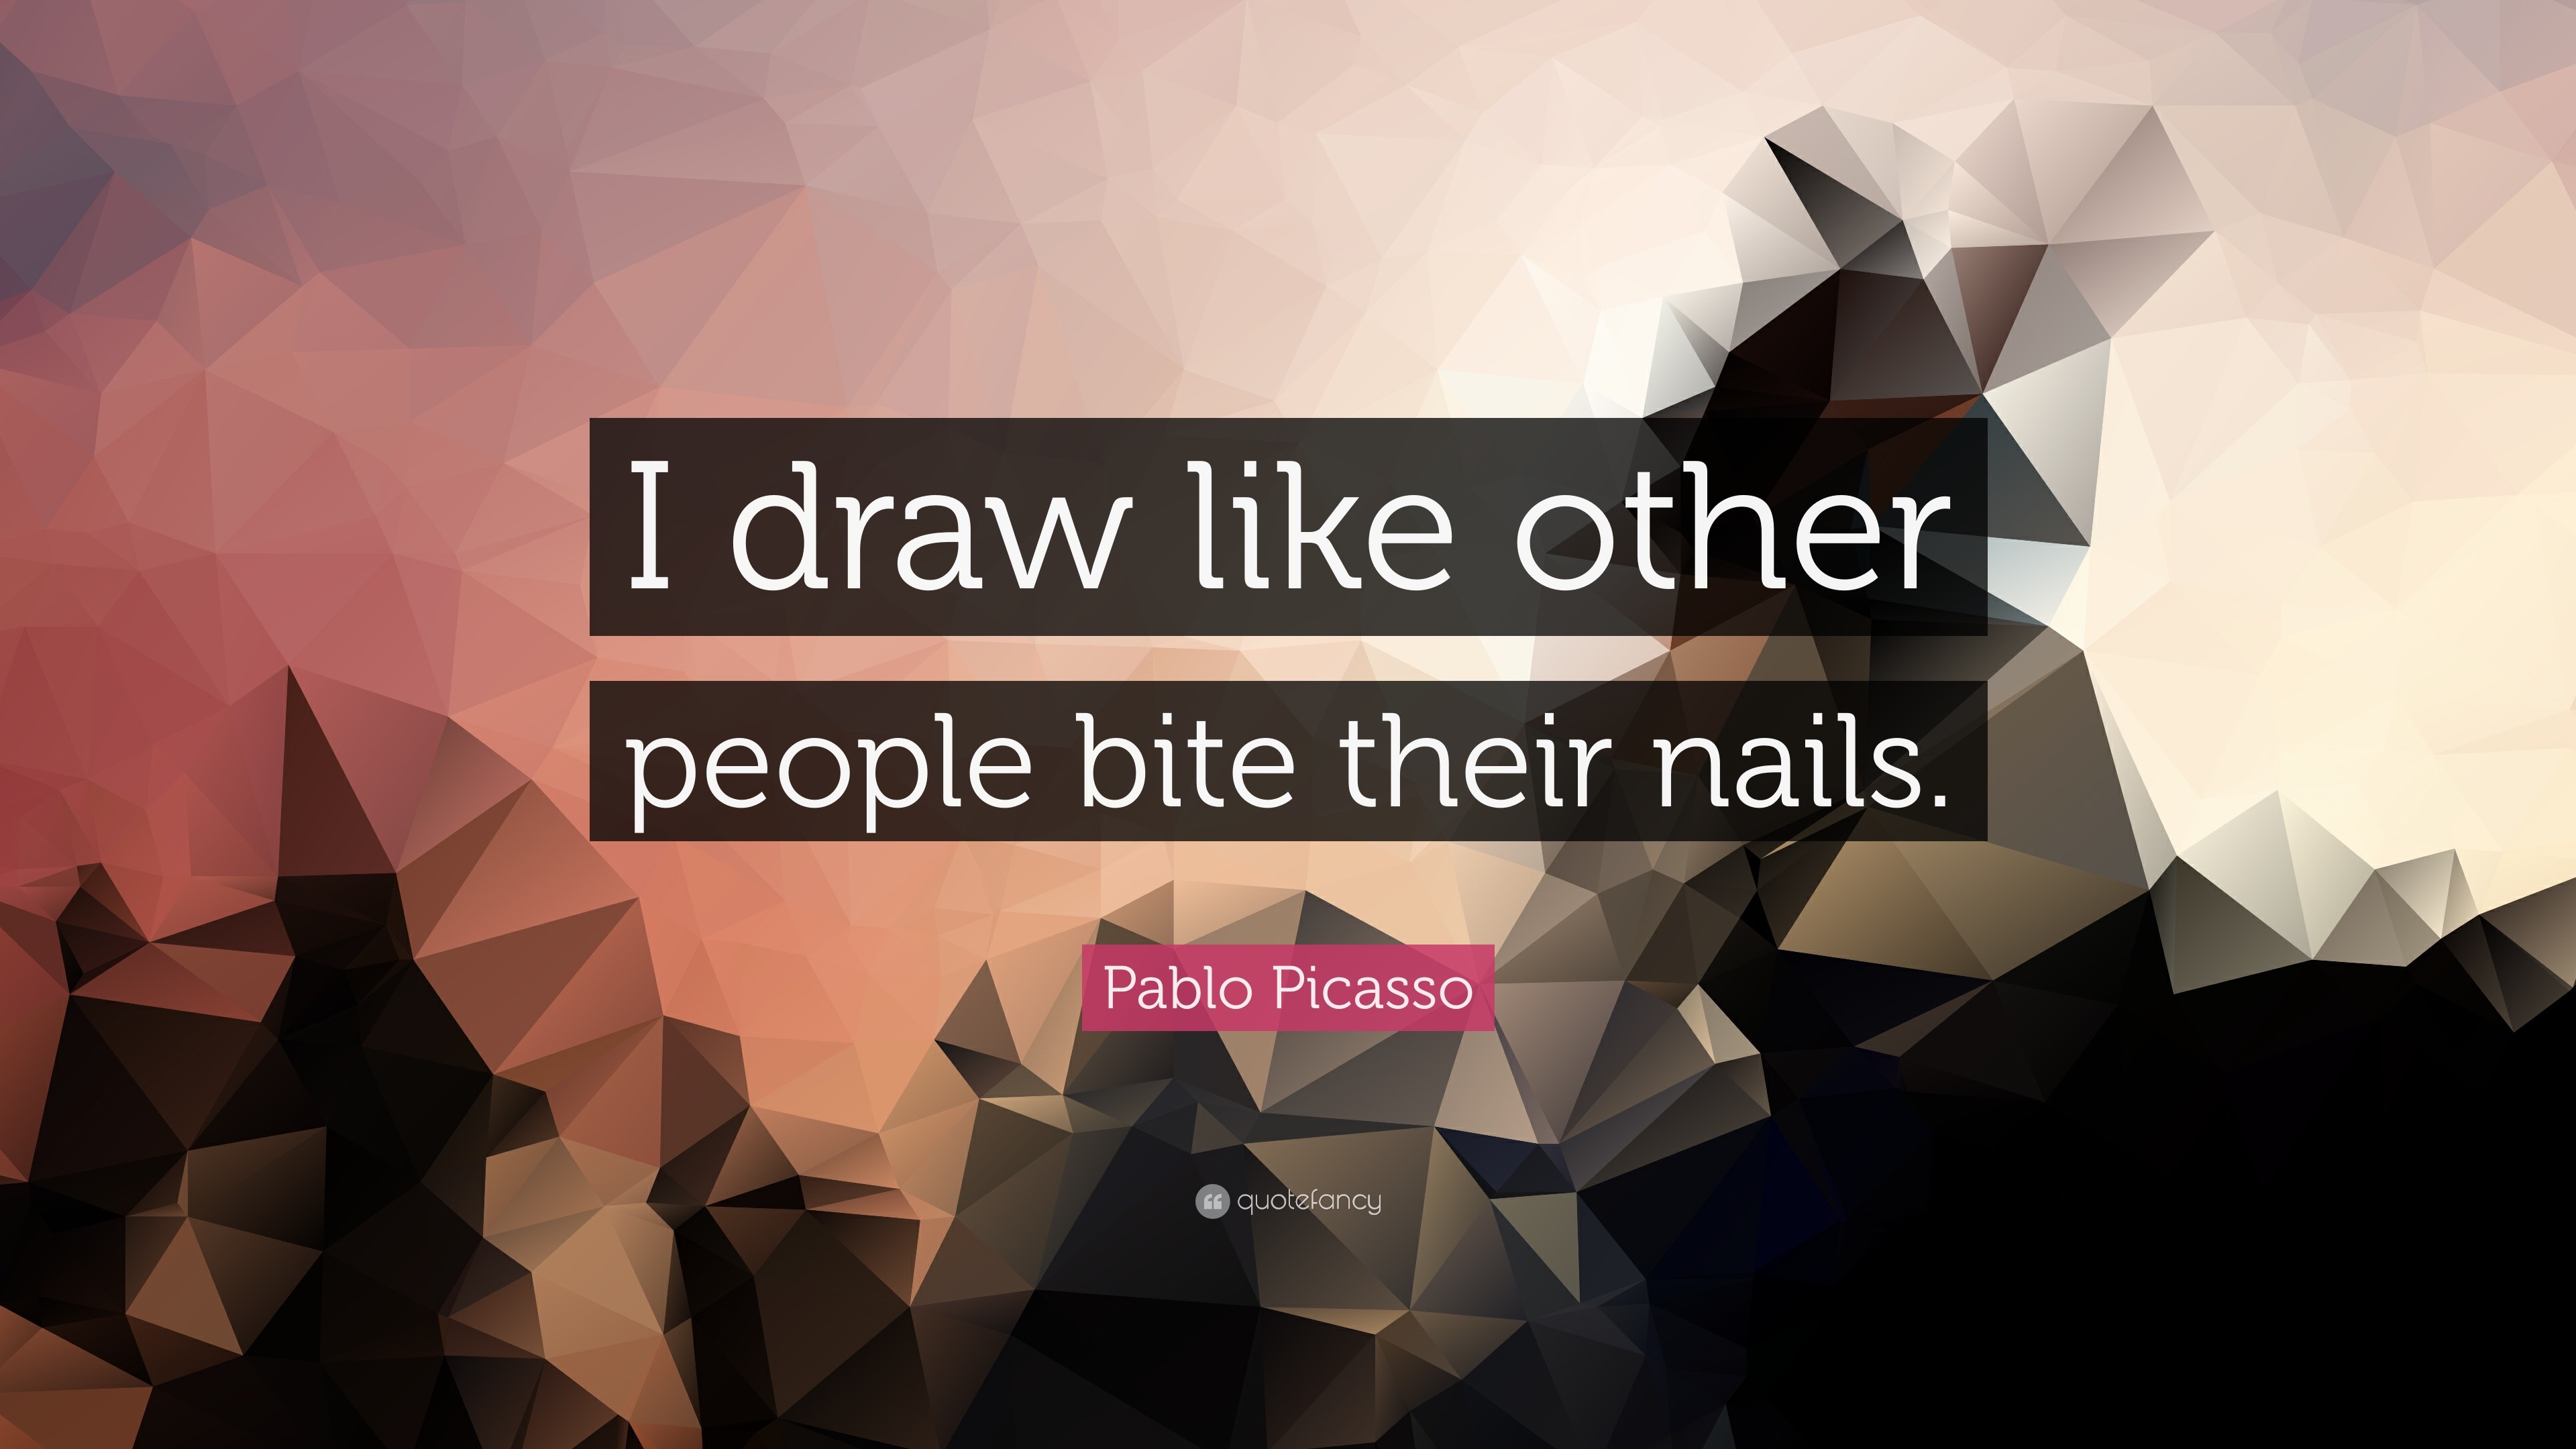 Pablo Picasso Quote: “I draw like other people bite their nails.”